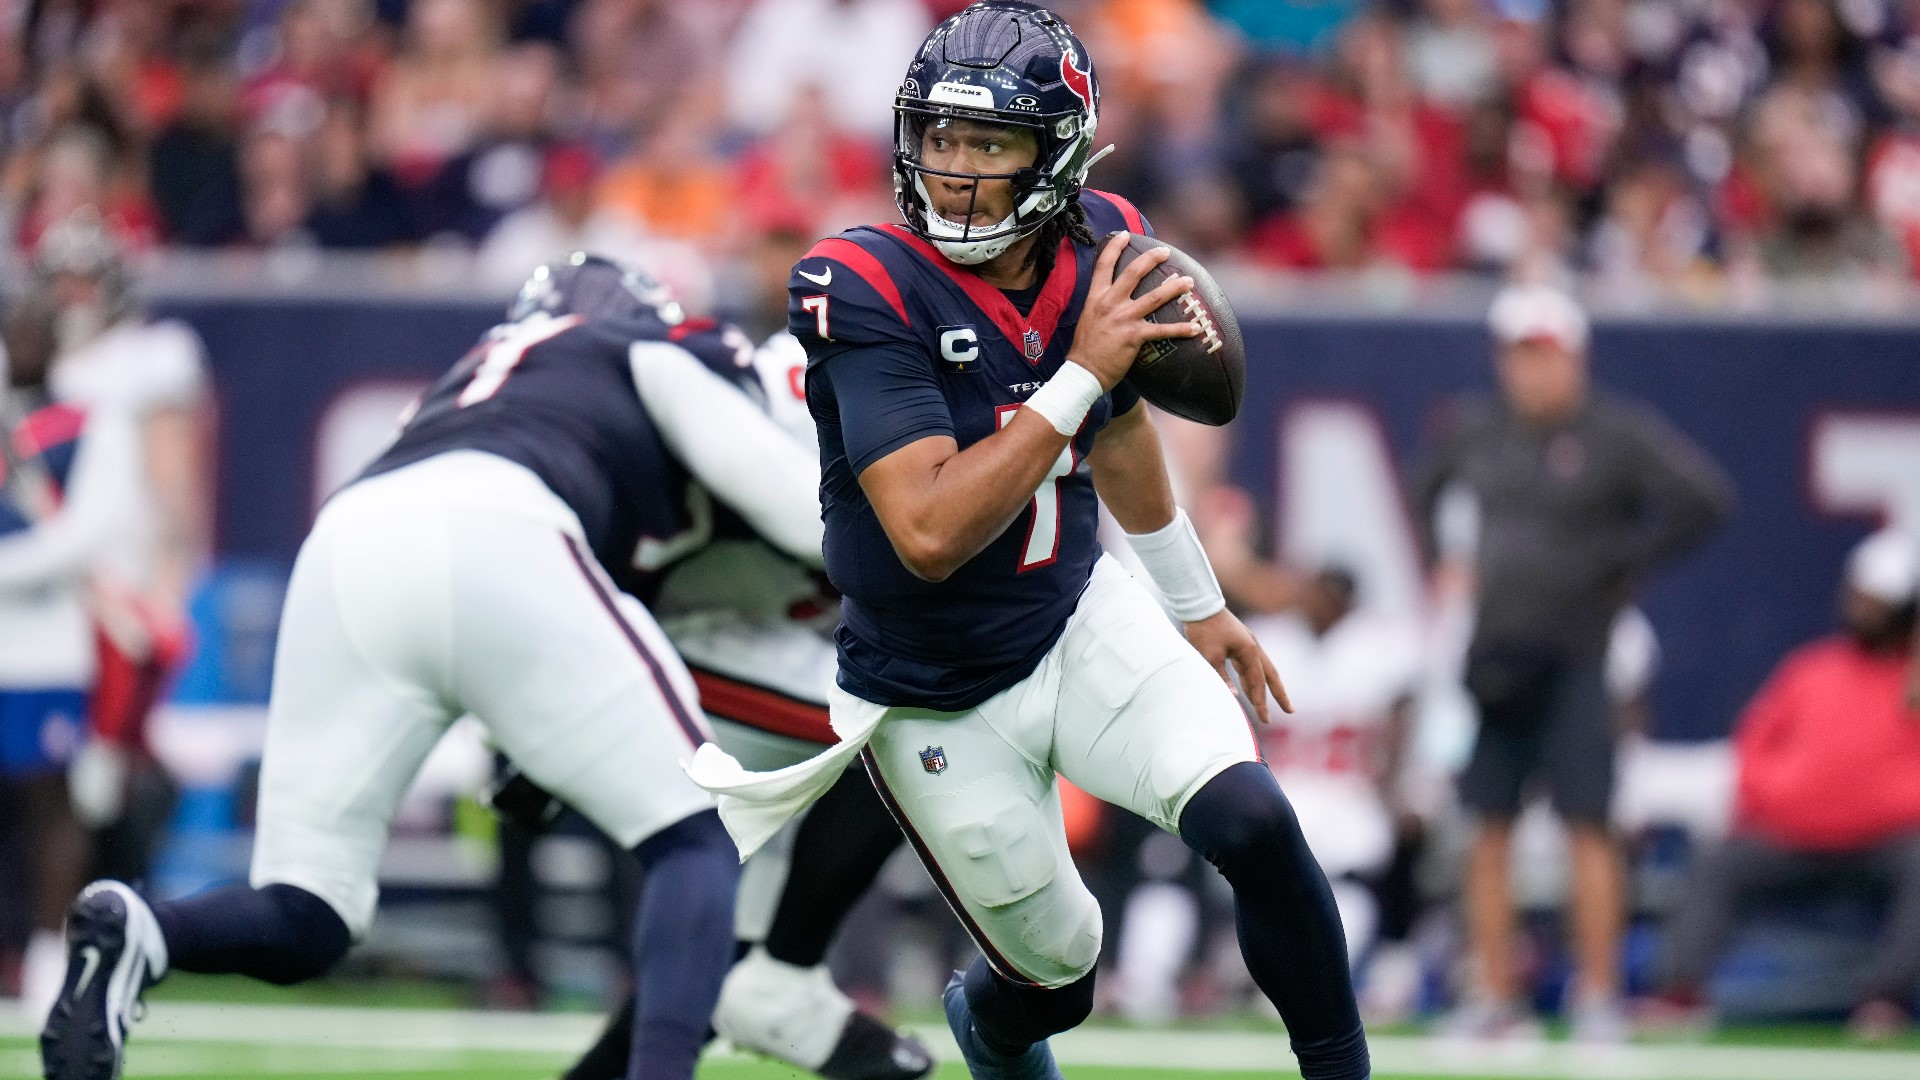 The Houston Texans beat Tampa Bay, 39-37, at NRG Stadium on Sunday. Rookie QB CJ Stroud threw for an NFL rookie record 470 yards.